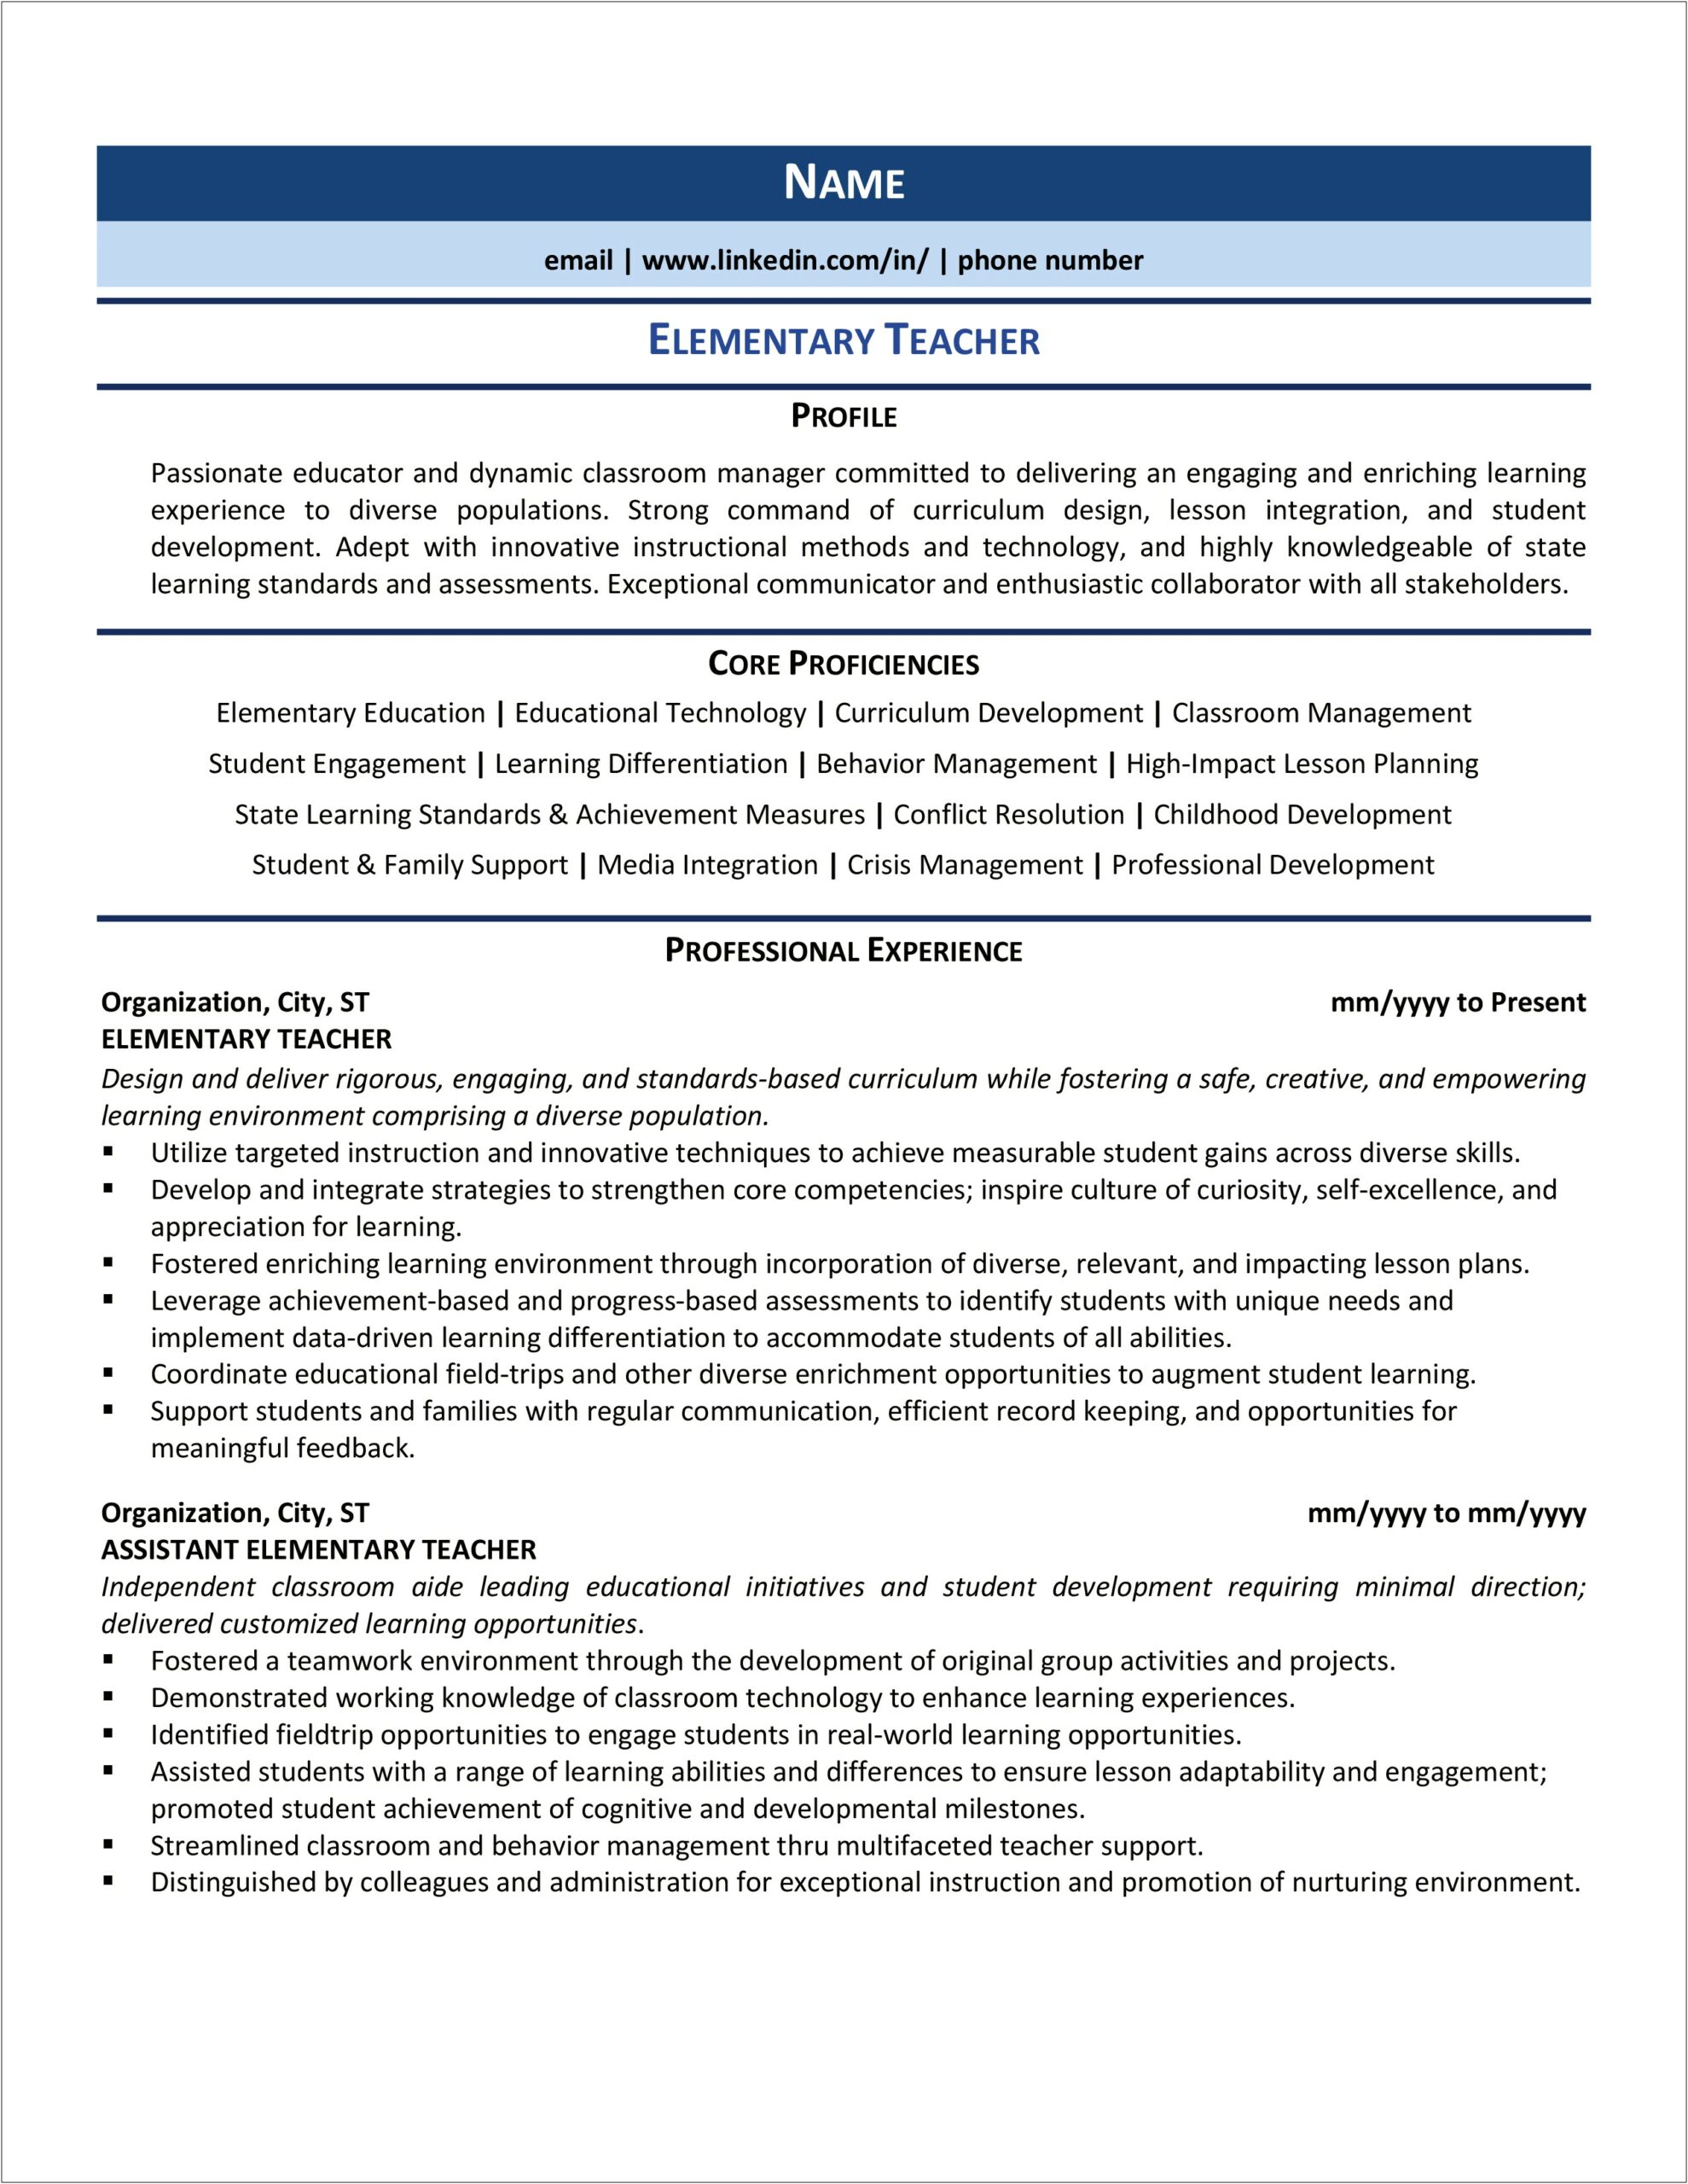 Examples Of Elementary Education Resumes